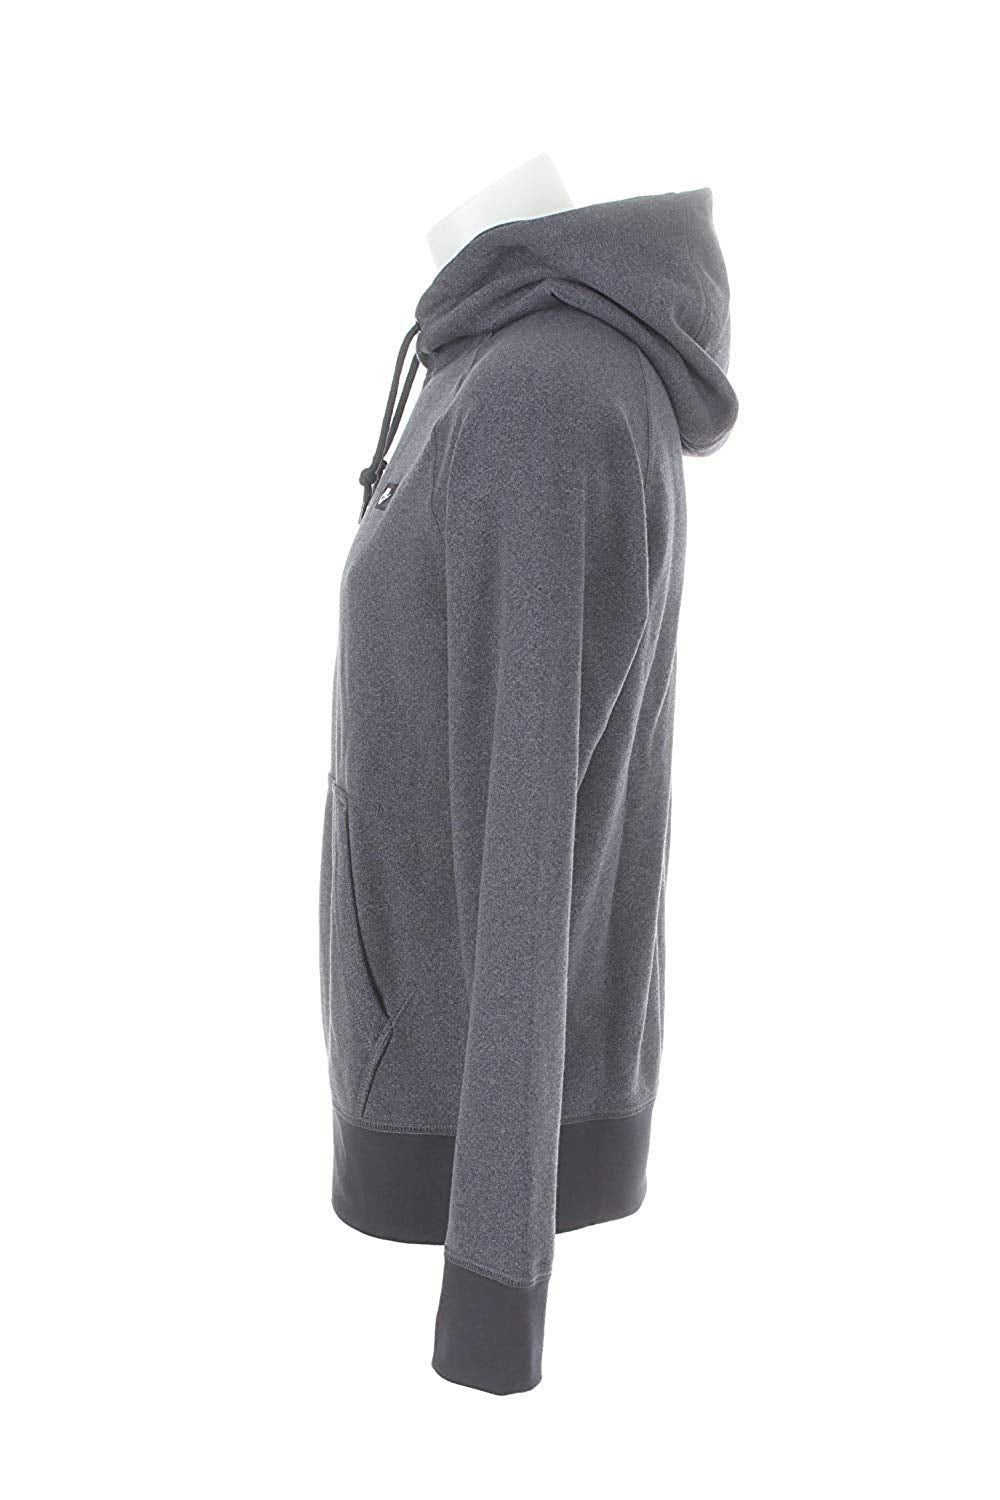 Nike Mens French Terry Shoebox Pullover Hoodie